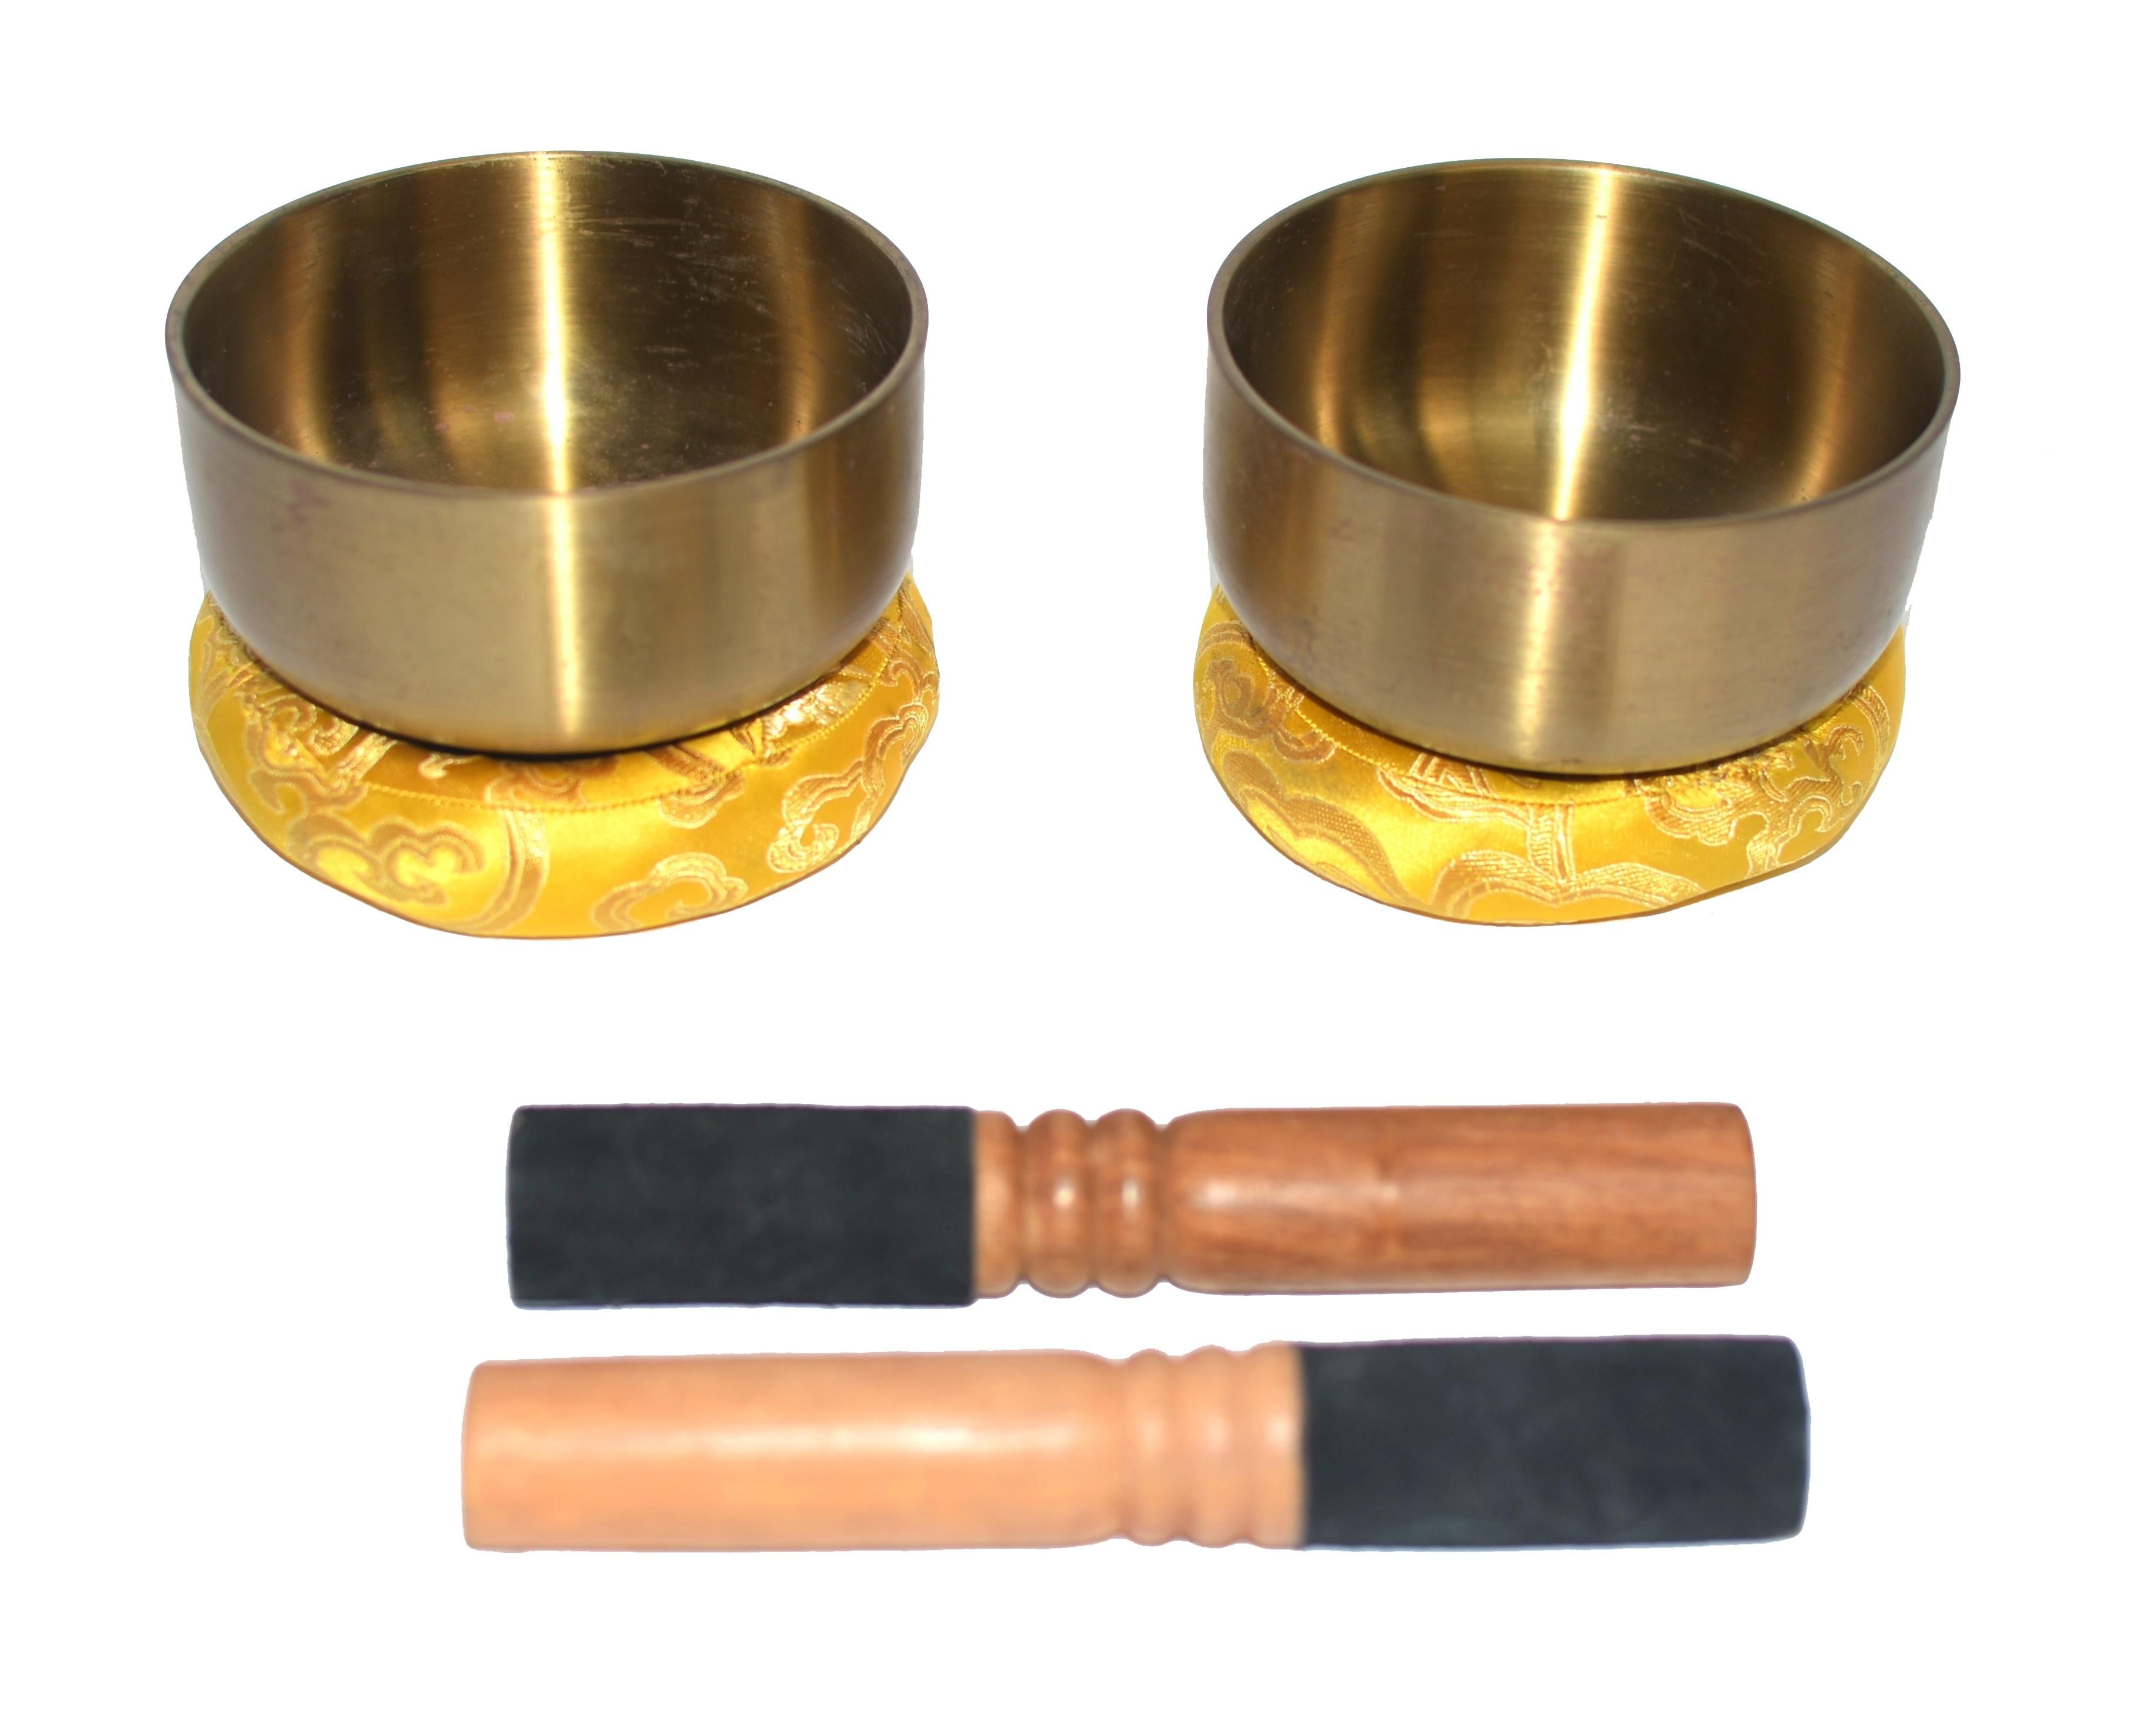 A pair of rare, 20th century, solid golden brass Japanese singing bowls of D6 tone. The upright design and plain surface reflect modern sophistication while the crisp tone conjures up the feeling of joy. A beautiful, single character of the word